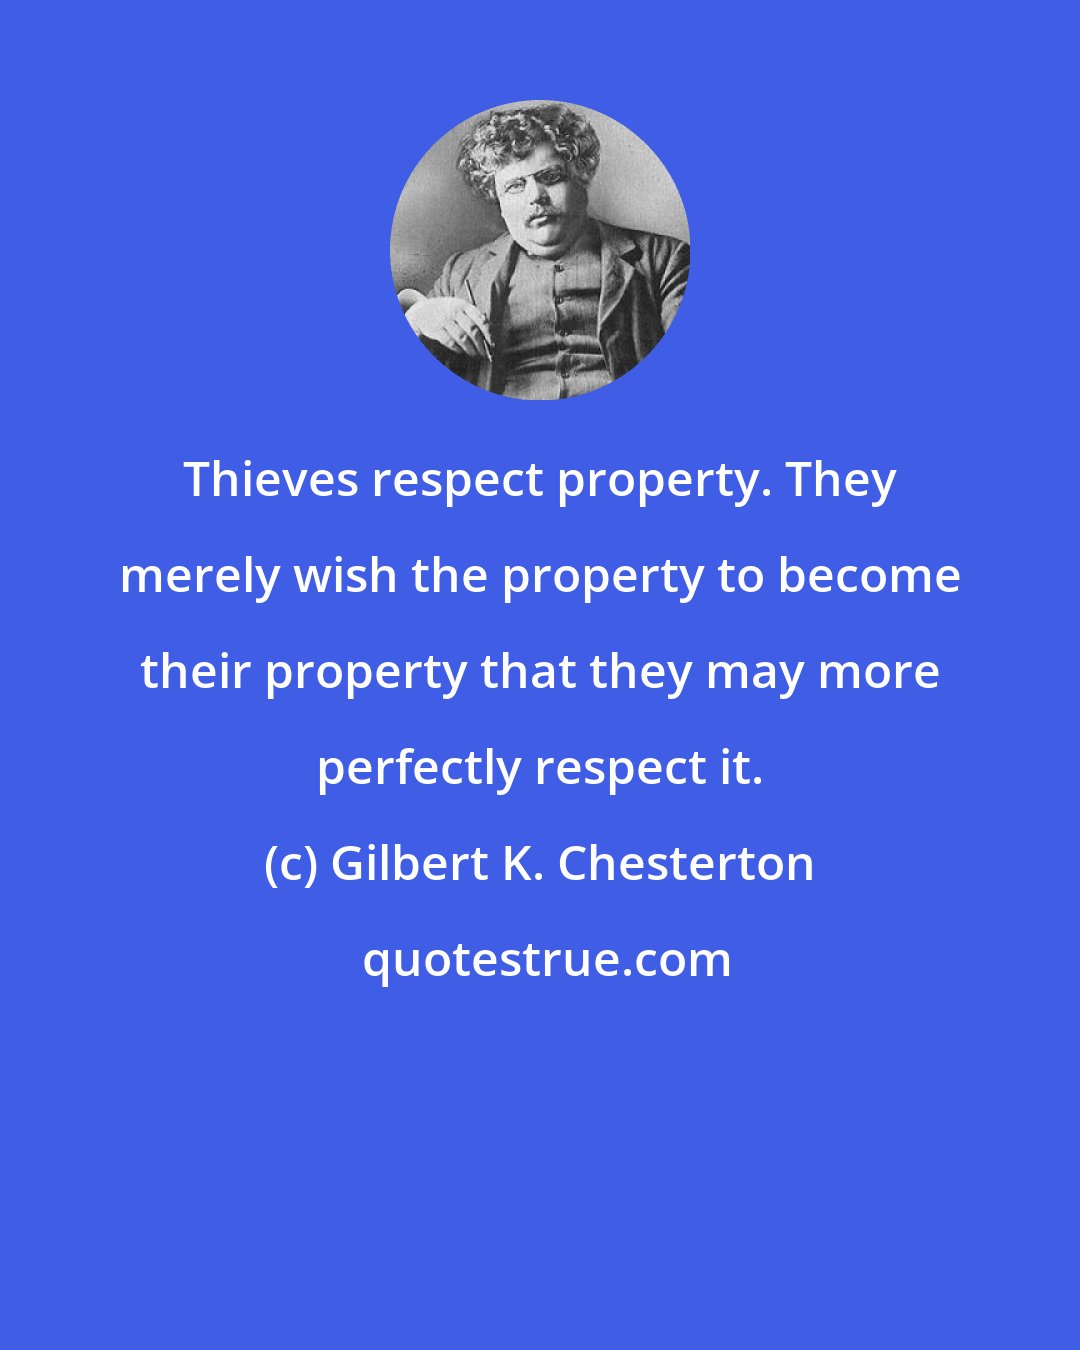 Gilbert K. Chesterton: Thieves respect property. They merely wish the property to become their property that they may more perfectly respect it.